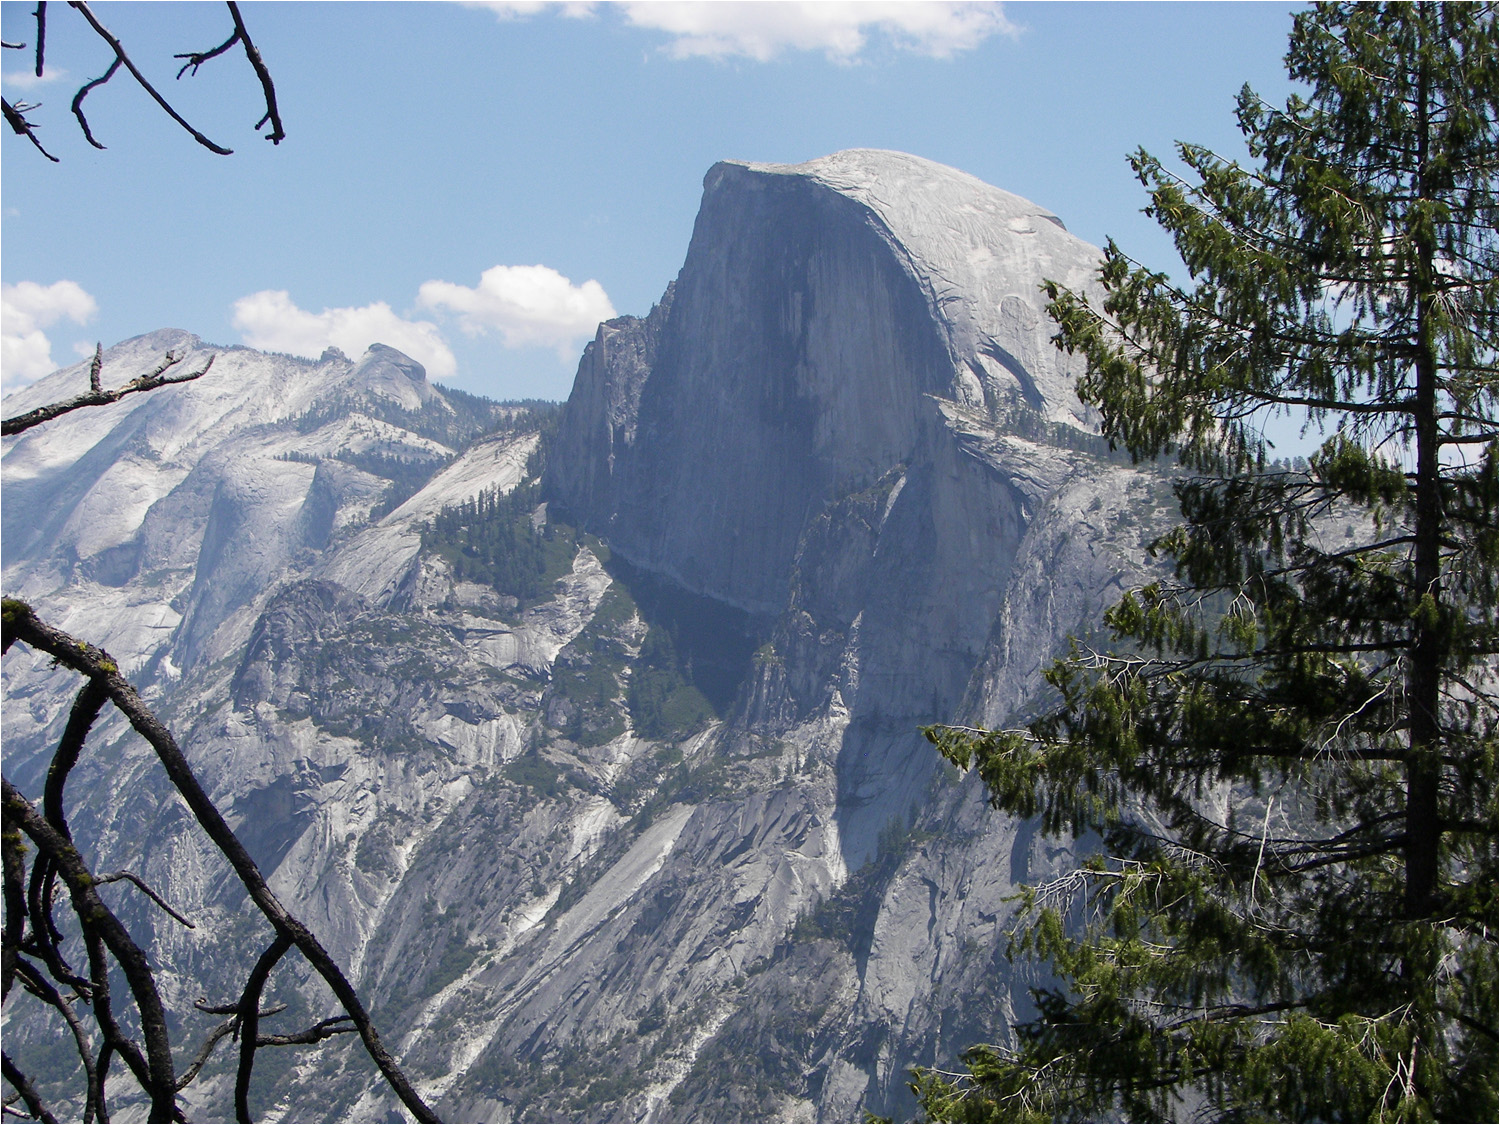 Glacier Point Hike-First views of Half Dome from trail